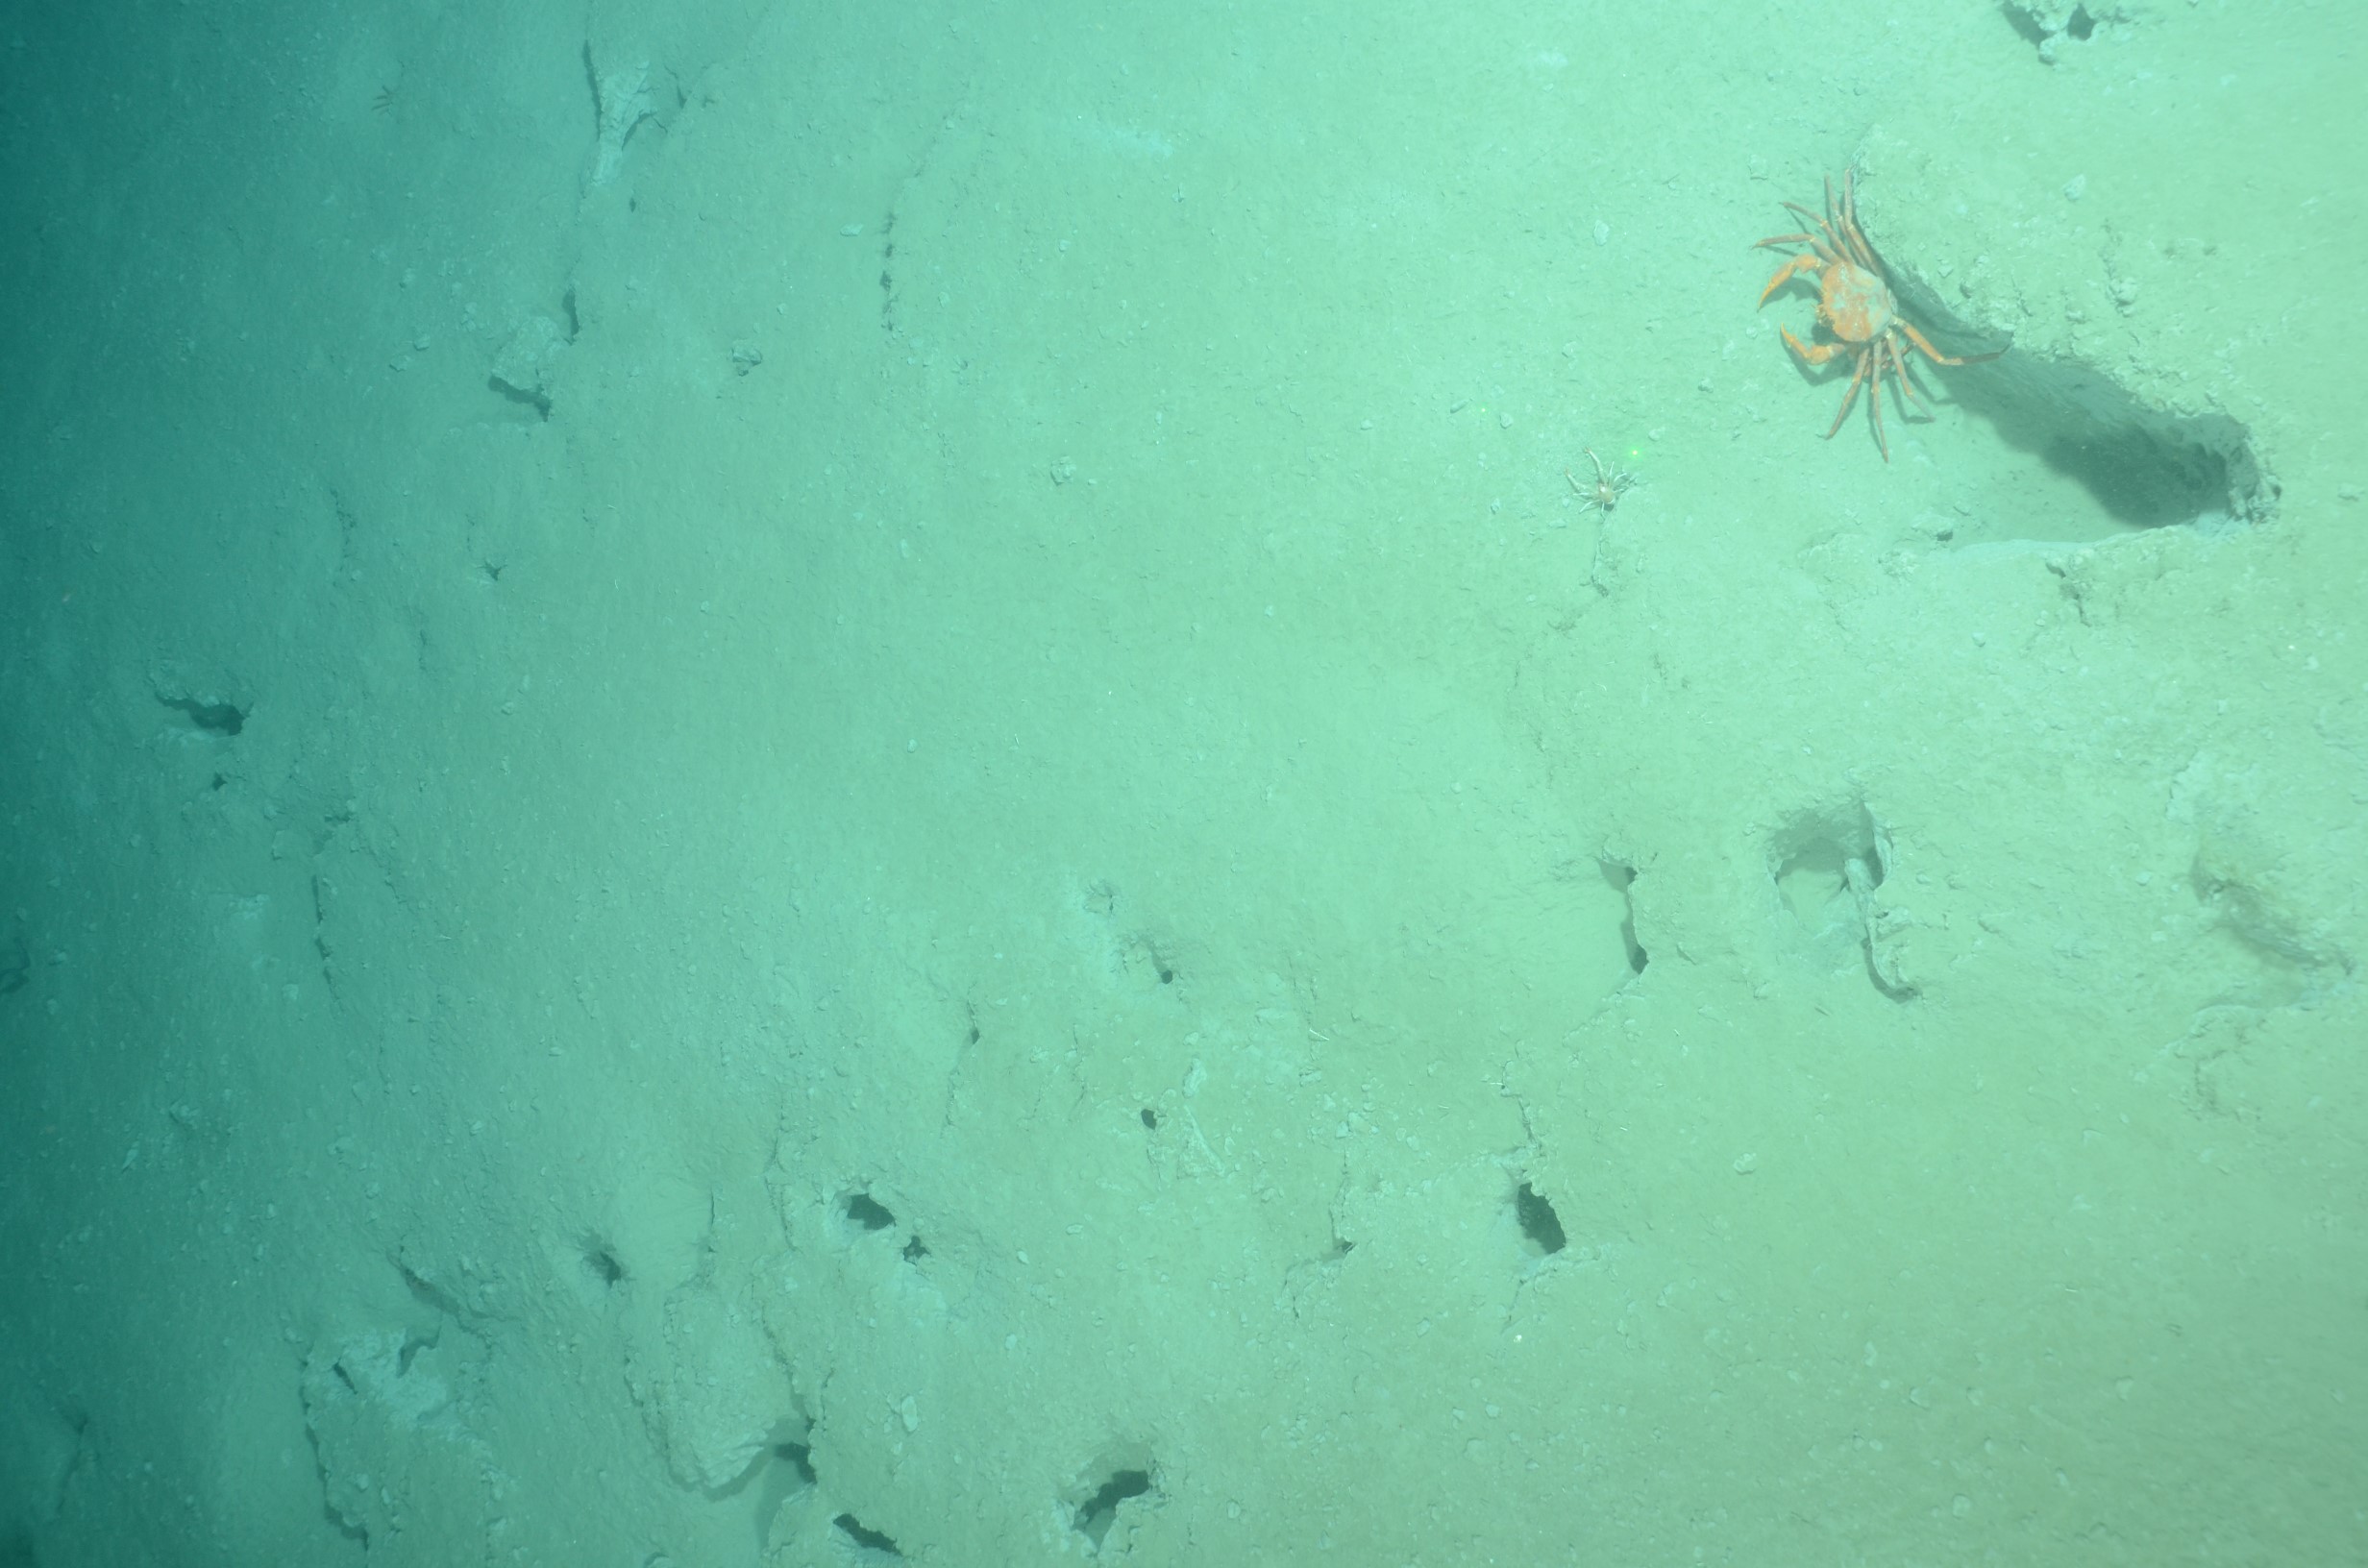 Burrows and red crabs on sediment near 680 meters in Wilmington Canyon